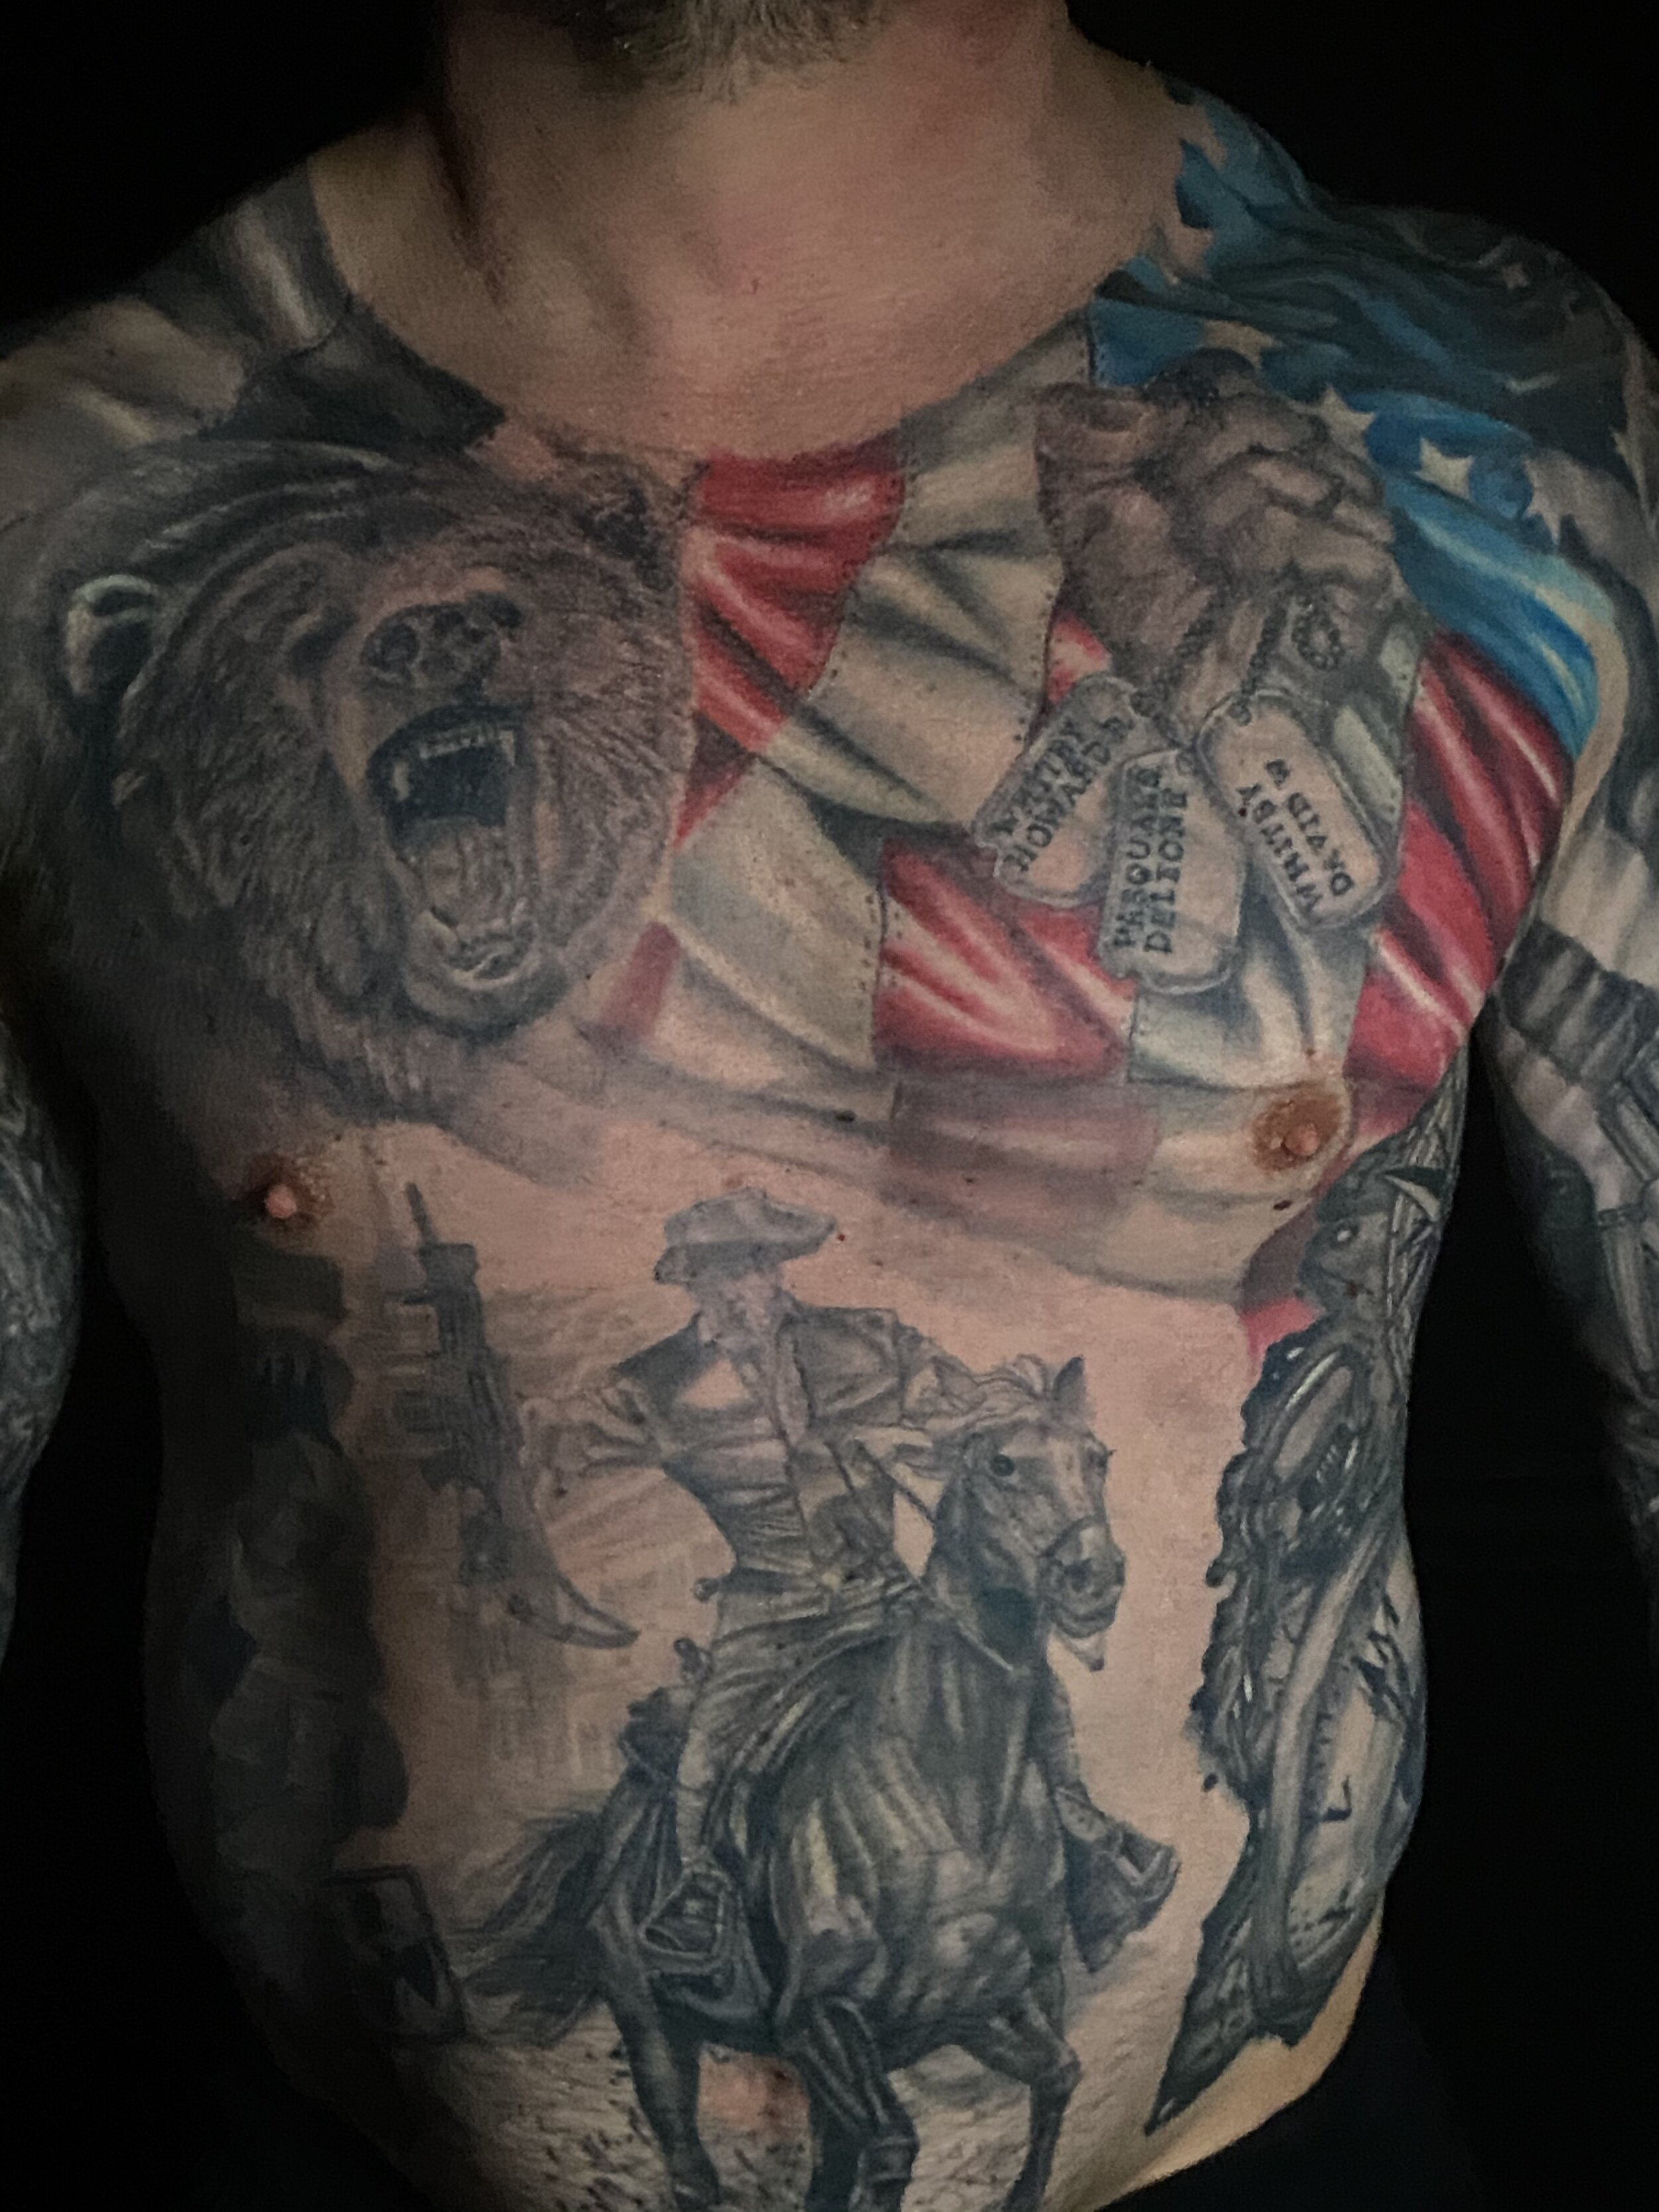 Tattoo Collection